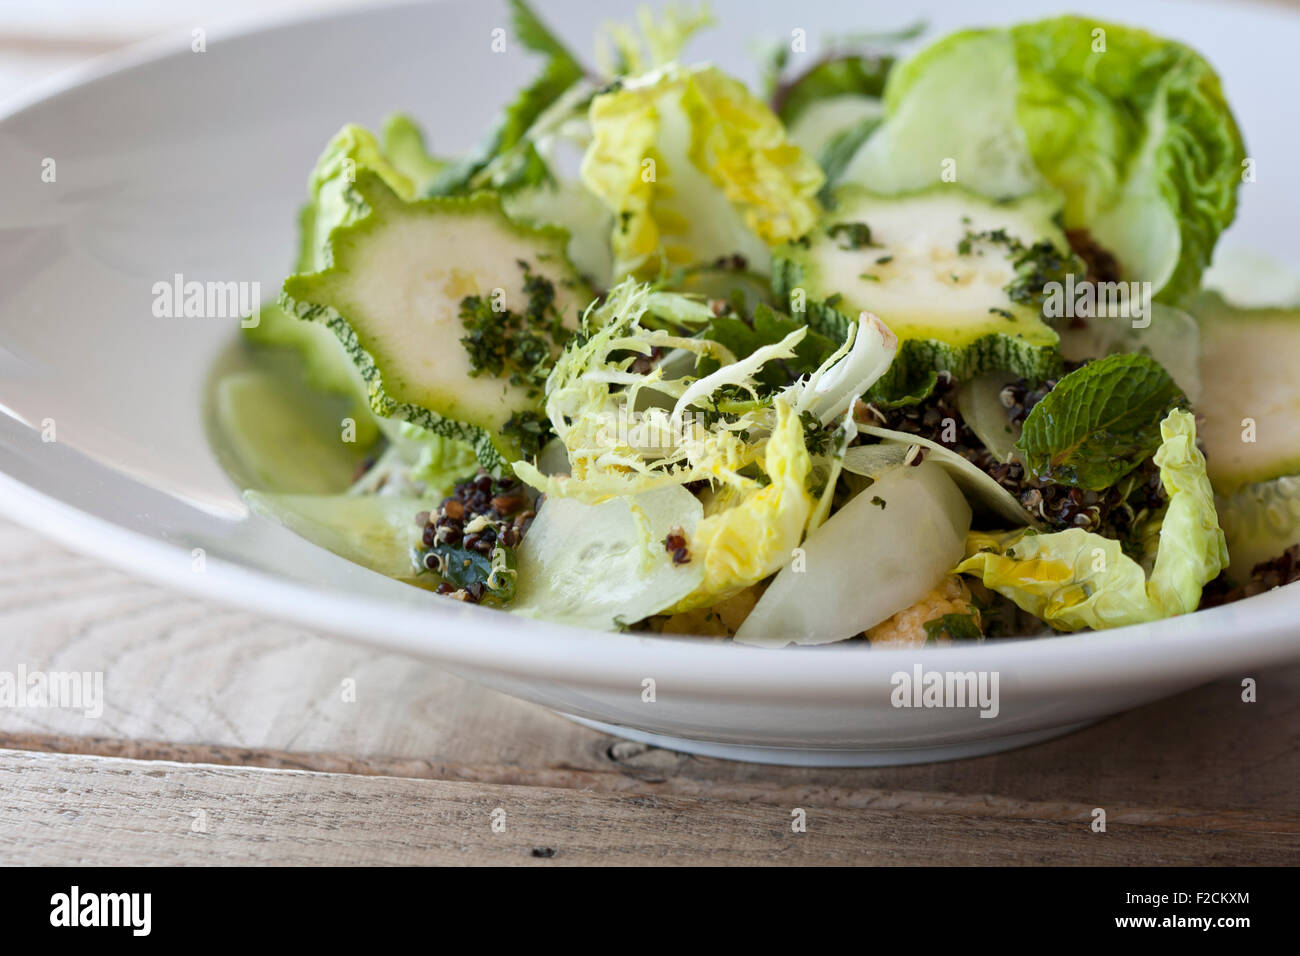 Side view of green salad with butter lettuce, radicchio, squash, in white bowl on table Stock Photo